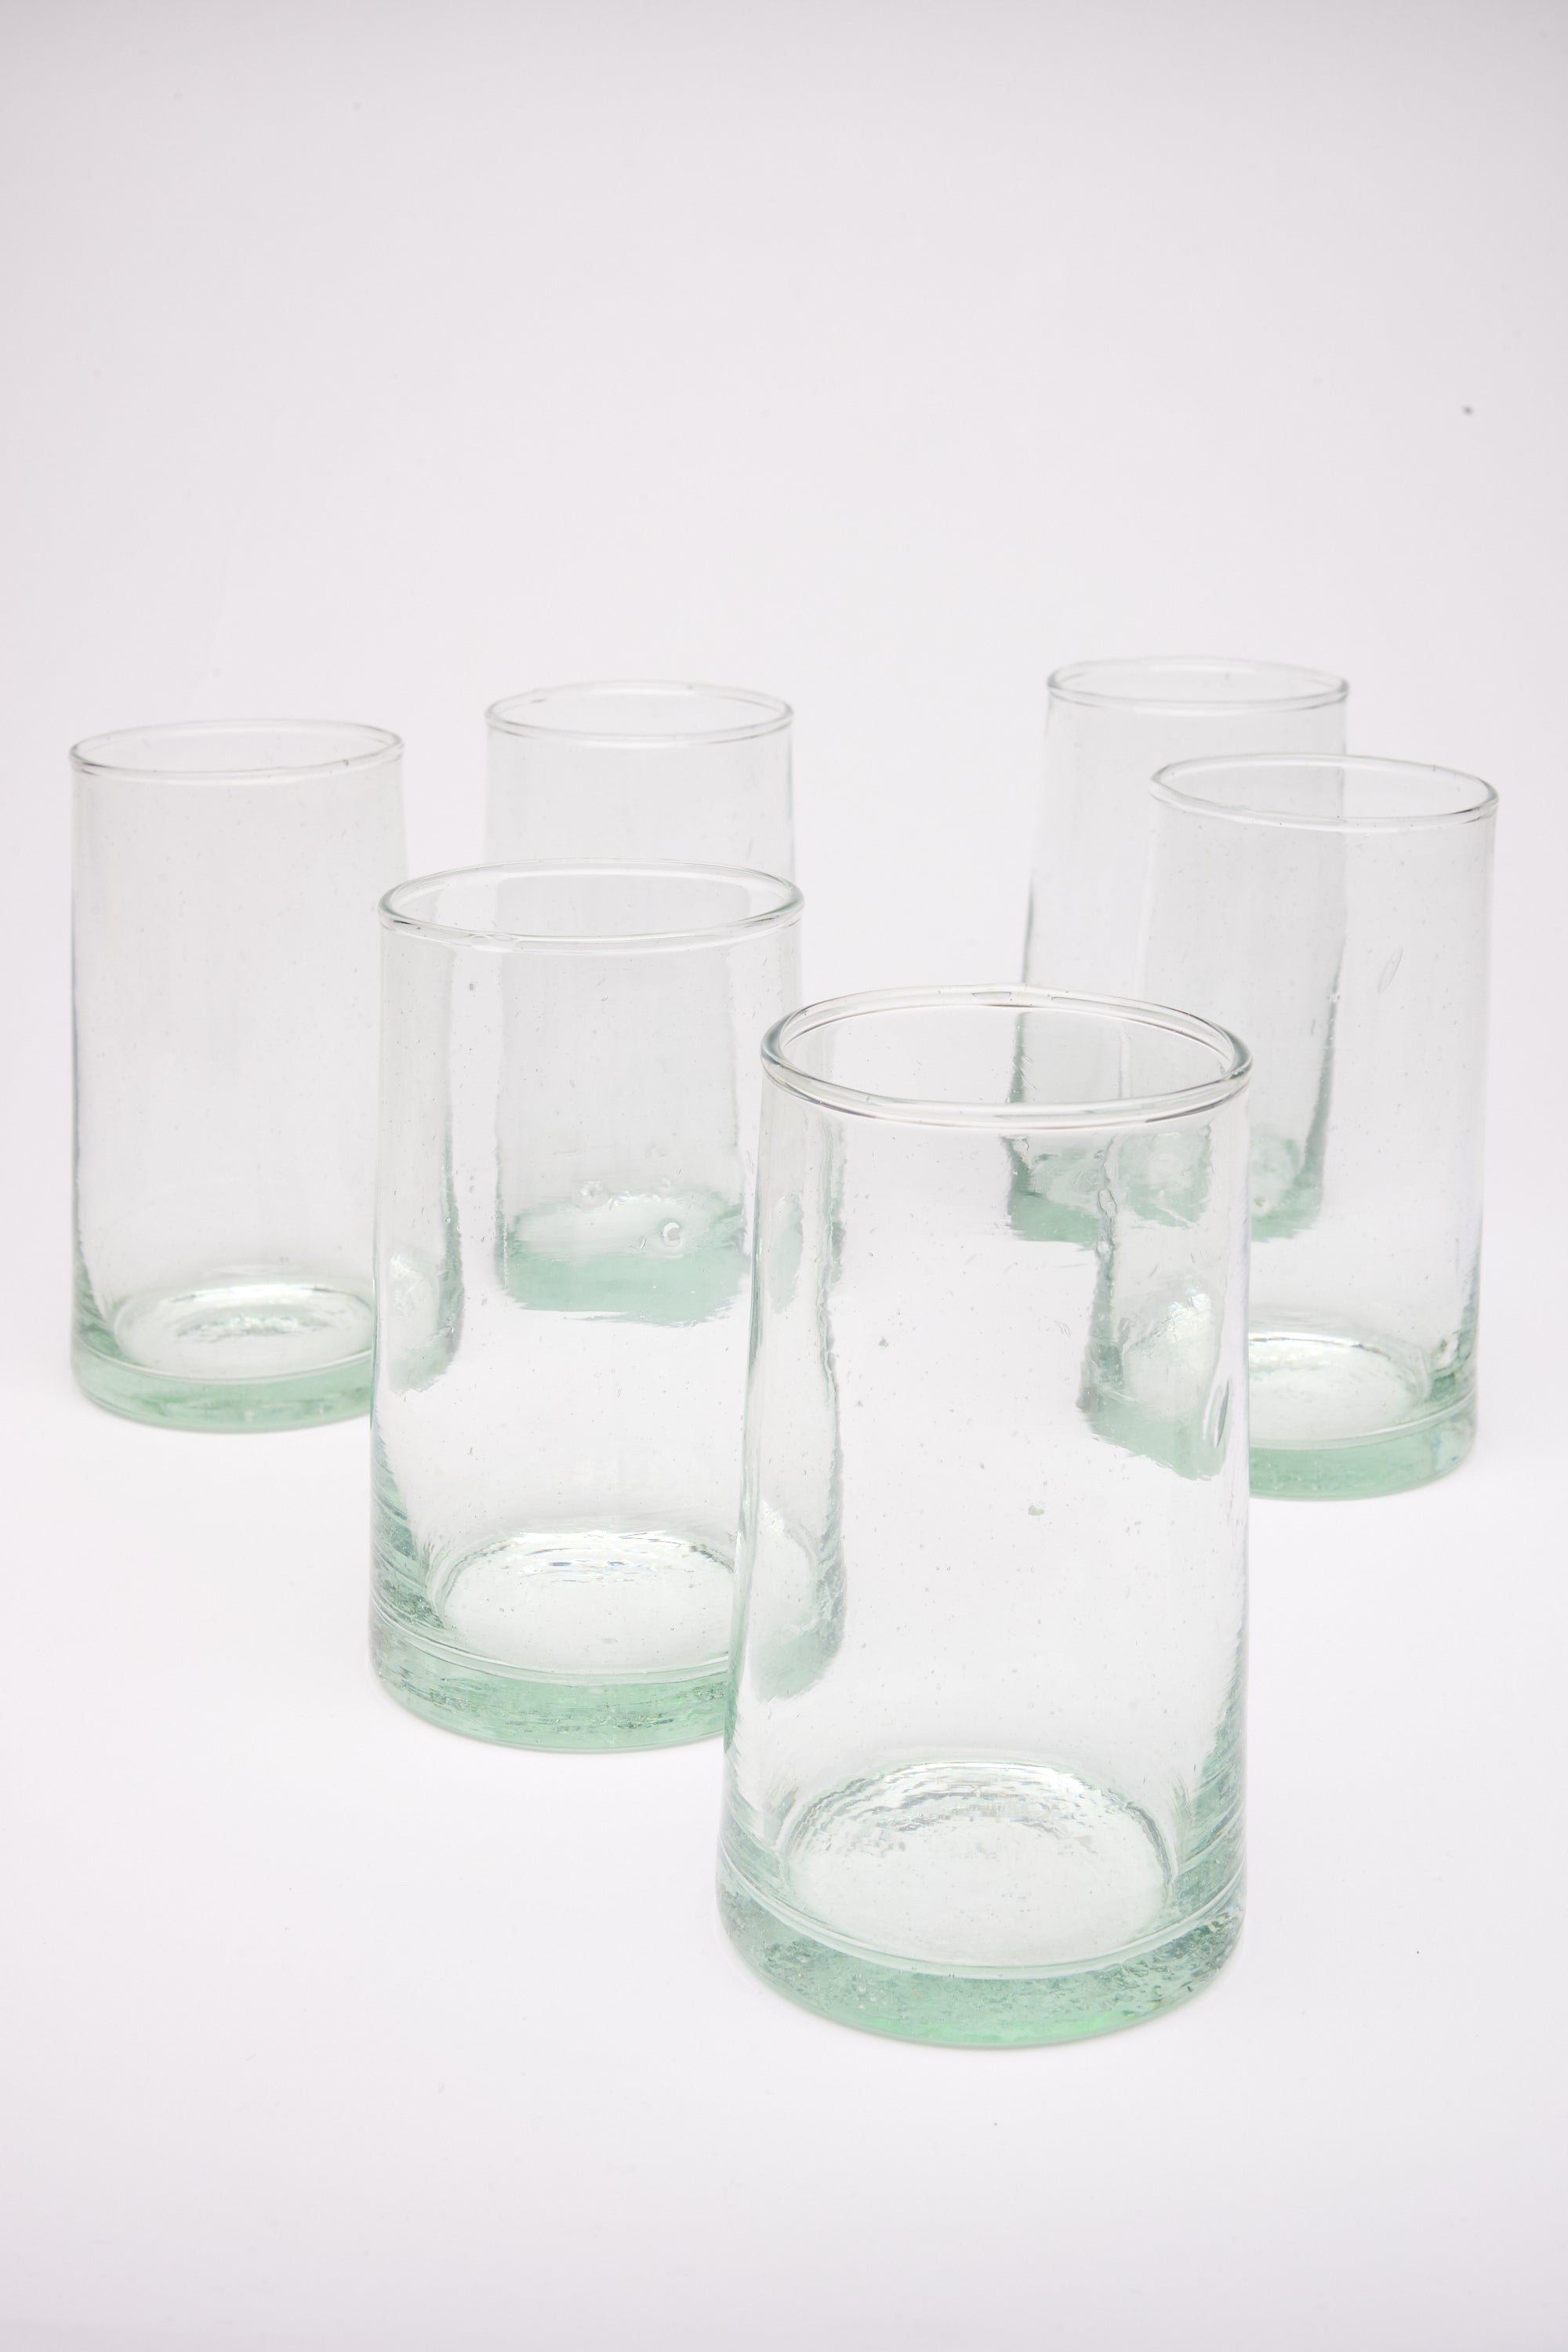 Tall Cone Moroccan Drinking Glasses in Clear, SET OF 6